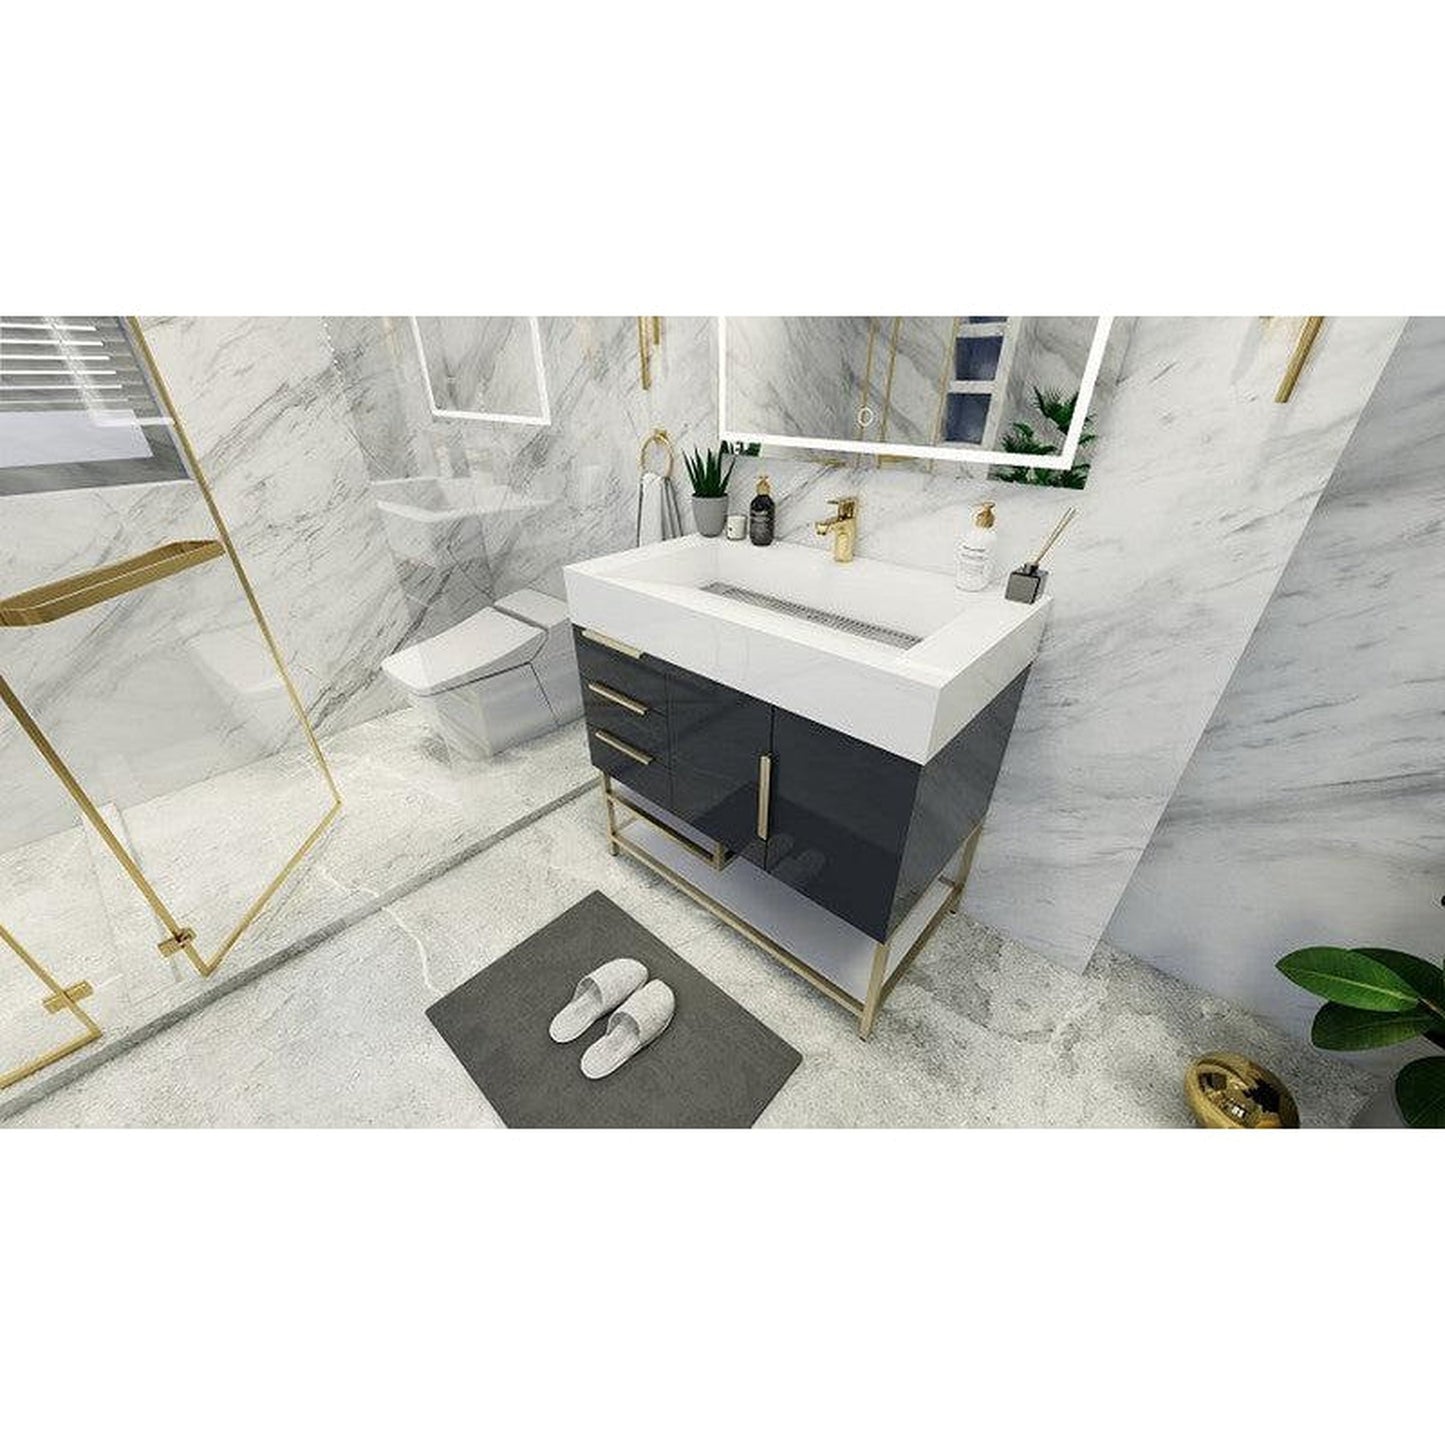 Moreno Bath Bethany 36" High Gloss Gray Freestanding Vanity With Left Side Drawers and Single Reinforced White Acrylic Sink